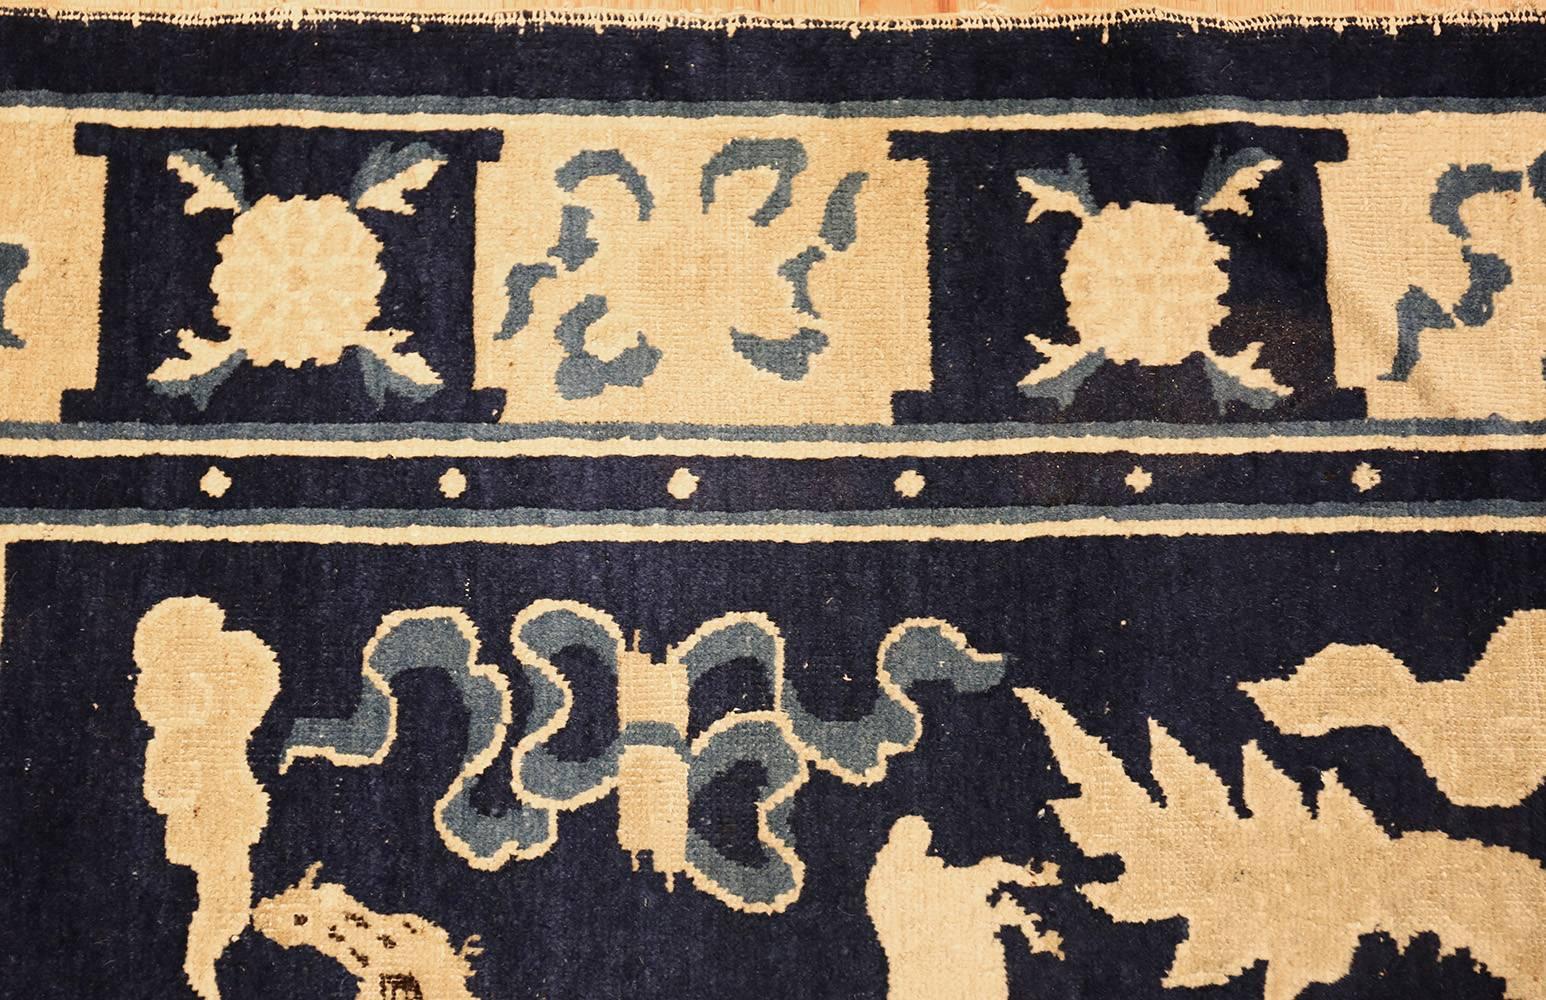 Rare and collectible antique blue Chinese Zodiac rug, country of origin: China, date circa 1900. Produced in breathtaking azure that has been paired with ivory, this antique Chinese rug depicts the familiar animals symbols of the Chinese zodiac. A